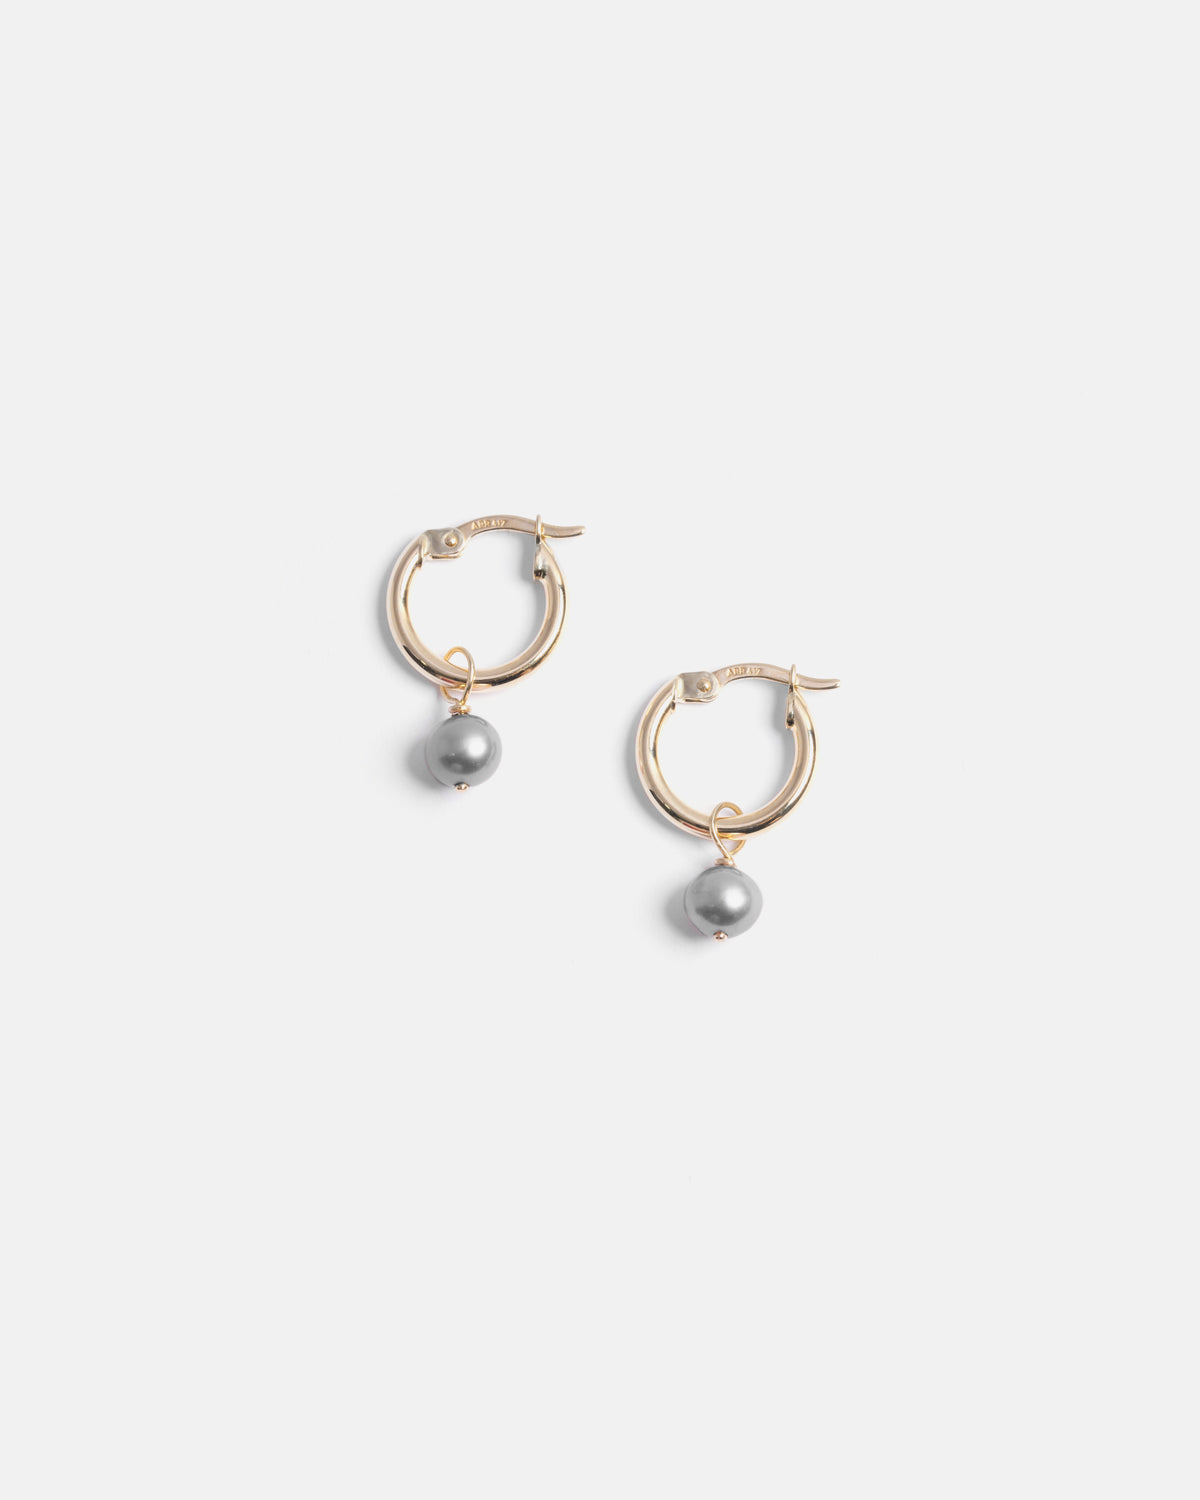 Pom-pom Hoops in Gold with Grey Pearls